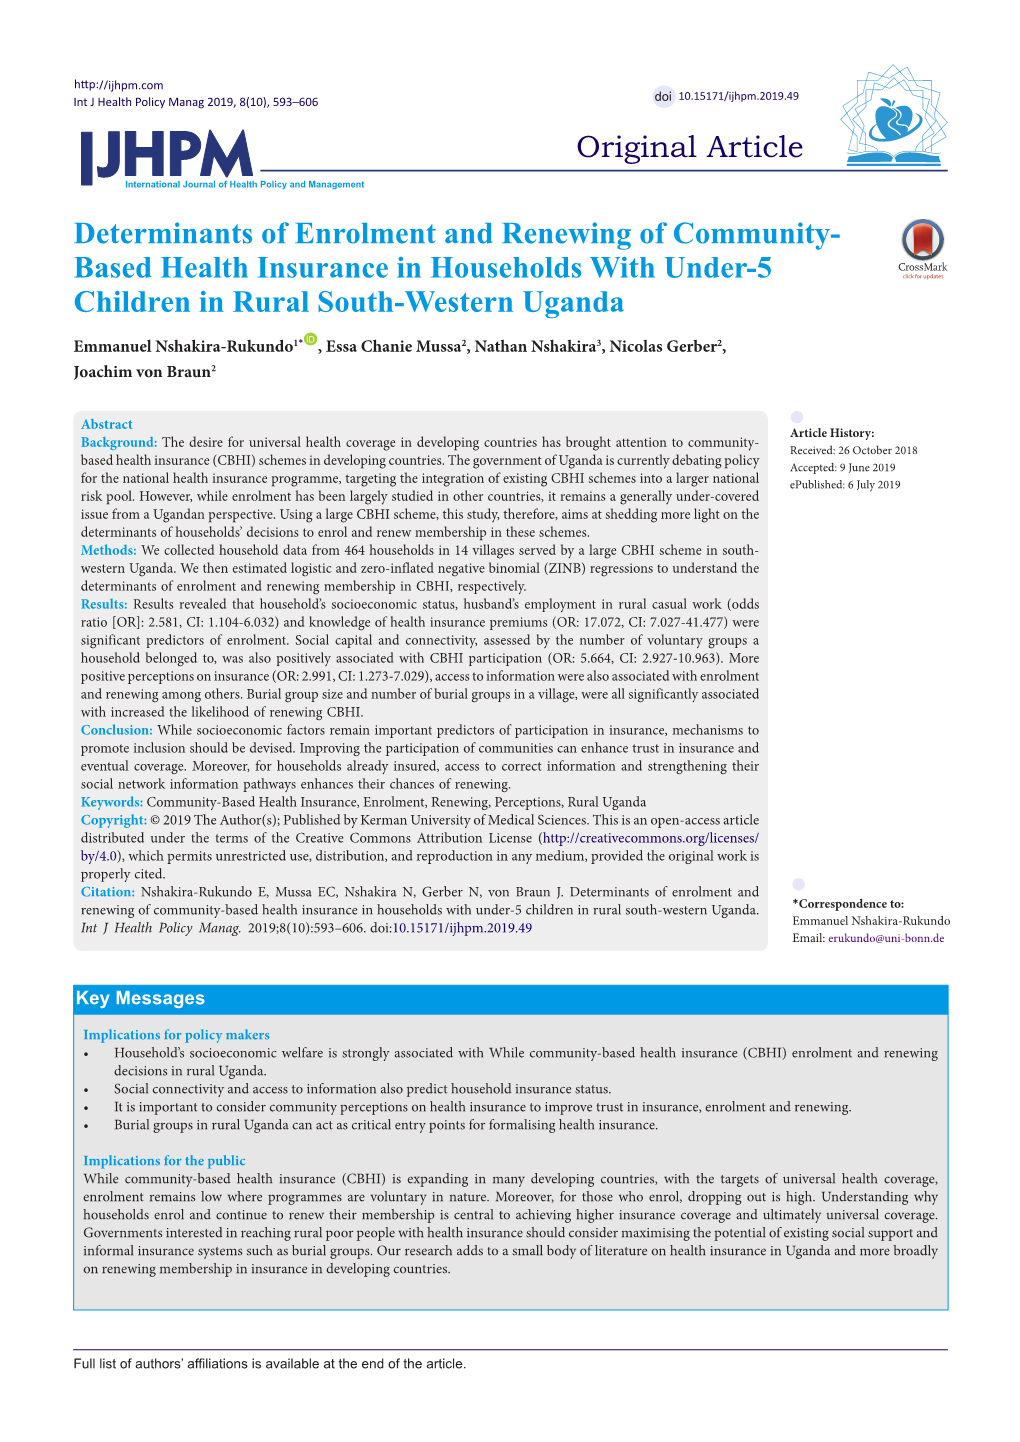 Determinants of Enrolment and Renewing of Community-Based Health Insurance in Households with Under-5 Children in Rural South-Western Uganda